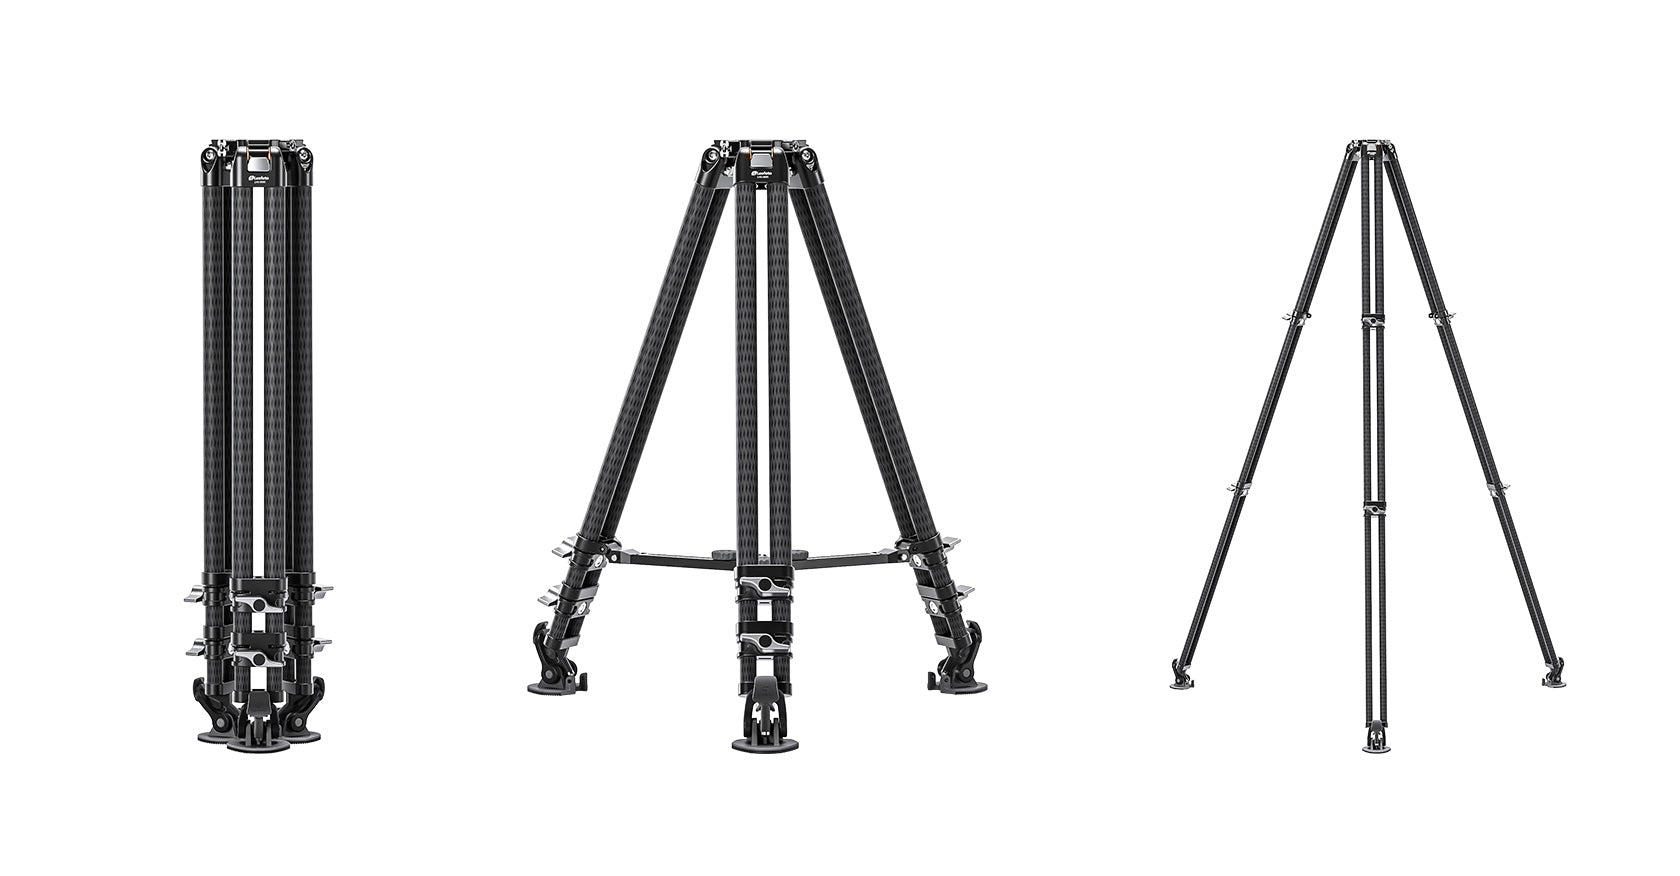 Leofoto LVC-253C+BV-20K (Knob Clamp) Dual-Tube Video Tripod with Fluid Head Set  | 75mm Integrated Bowl with Leveling Base and Handle